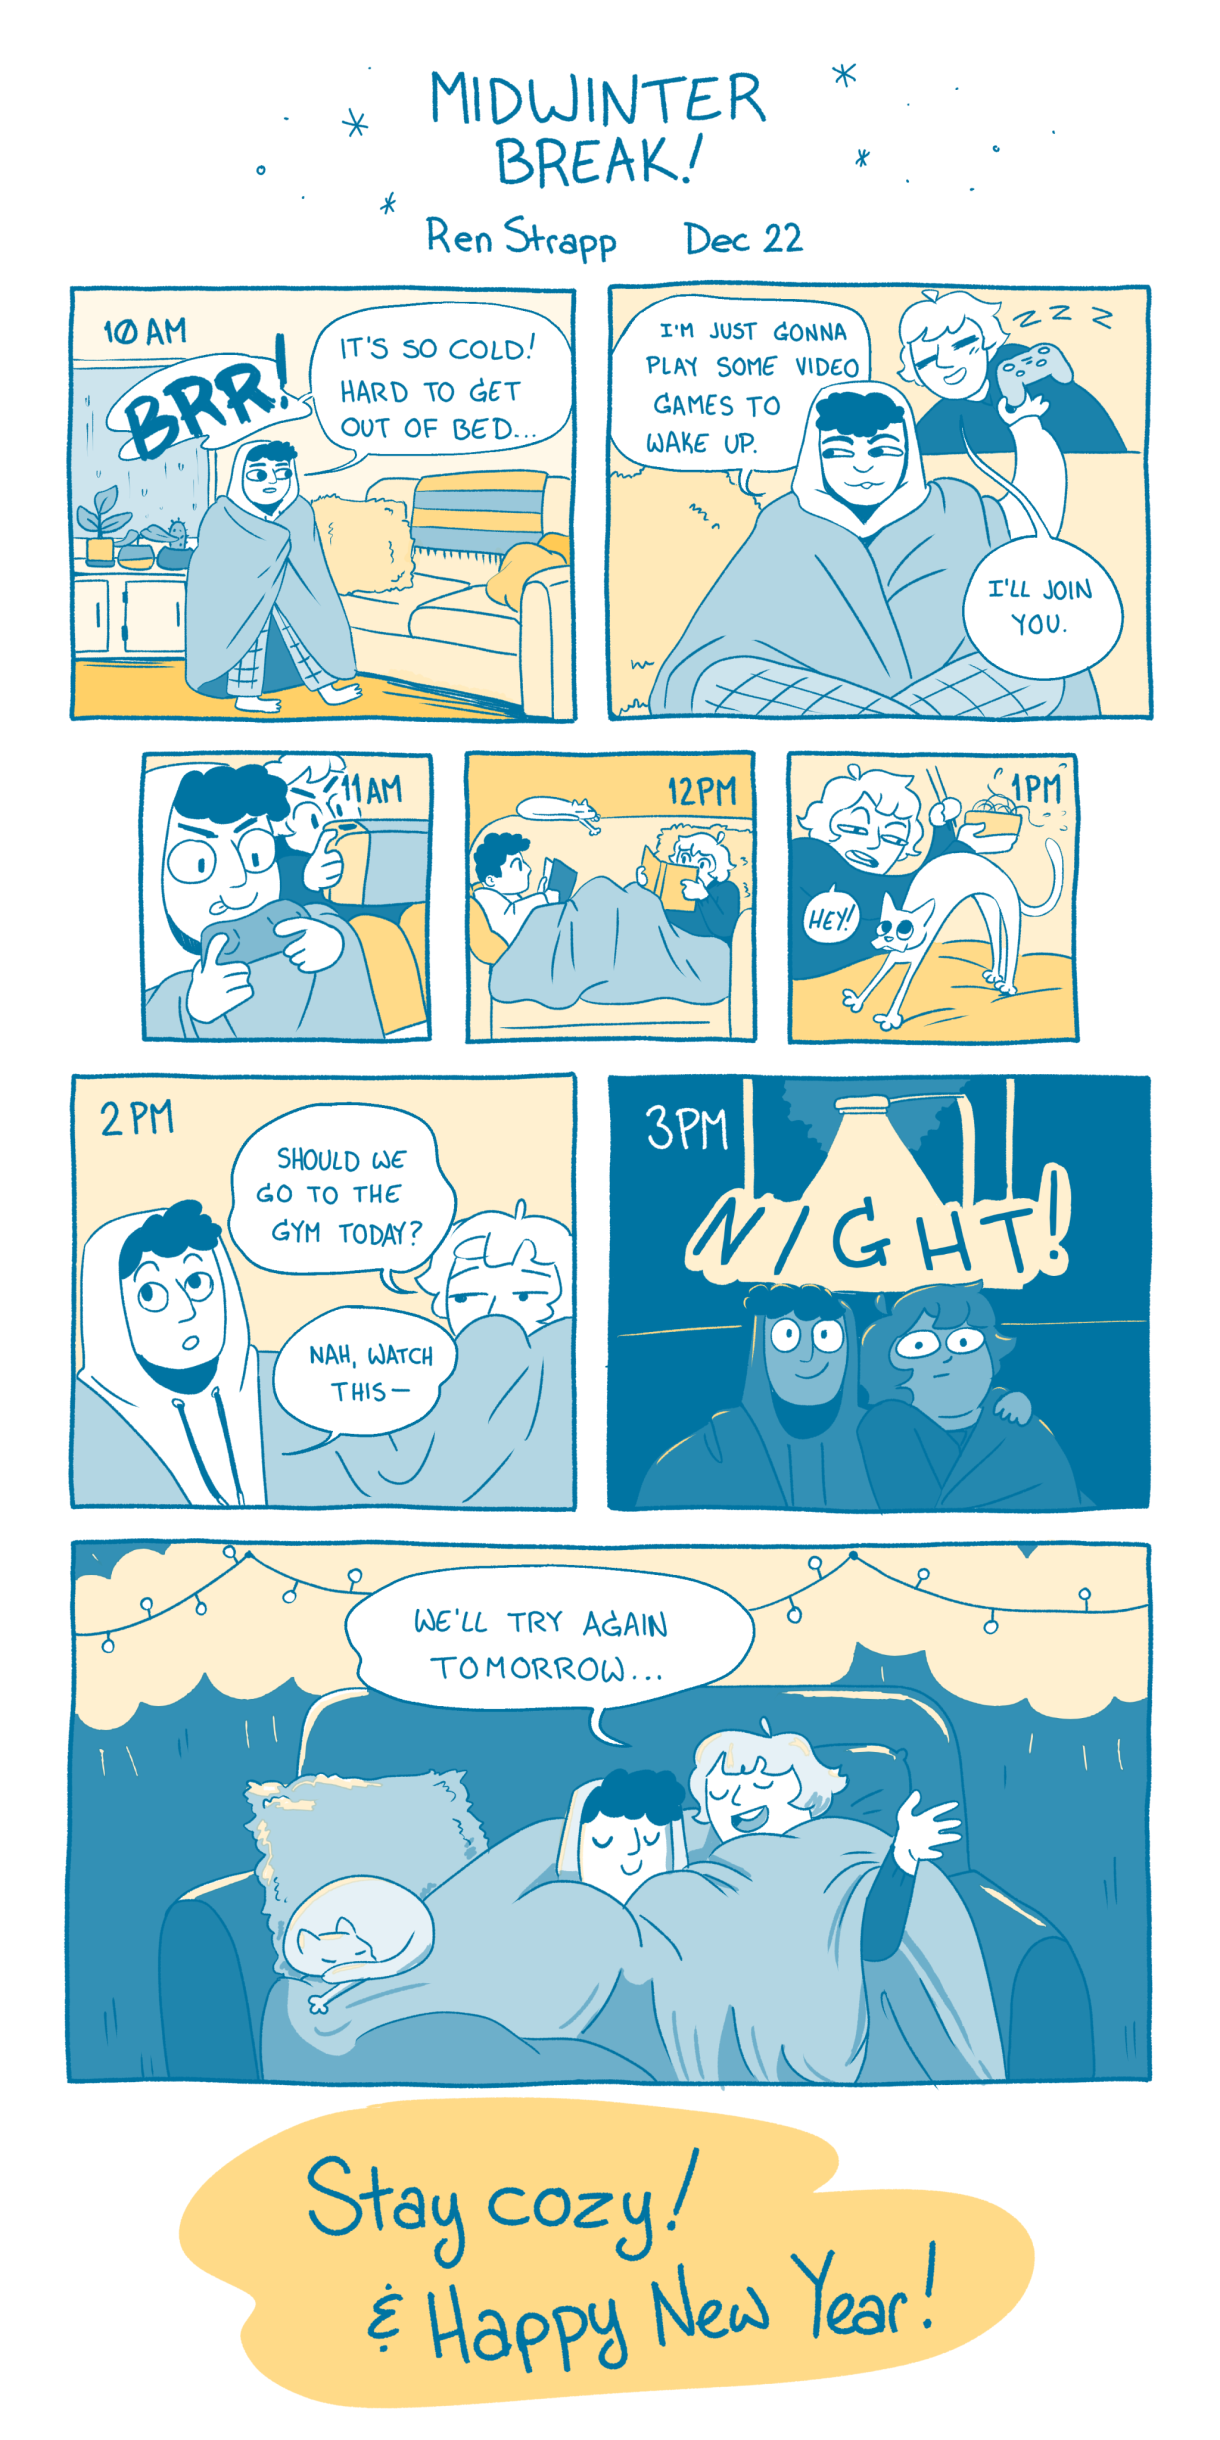 In a nine panel comic in the colors of teal, light blue, and yellow, drawn with a pen, two friends are figuring out their day. At 10am they wake up and it's too cold to get out of bed, at 11am they play video games to wake up, at 12pm they read a book under a blanket on the couch, at 1pm they eat noodles and play with their cat, at 2pm they consider going to the gym but decide instead to watch tv. And by 3pm, it is already night out. So, instead they snuggle under a blanket. They are smiling together. One friend says to the other, "We'll try again tomorrow..."